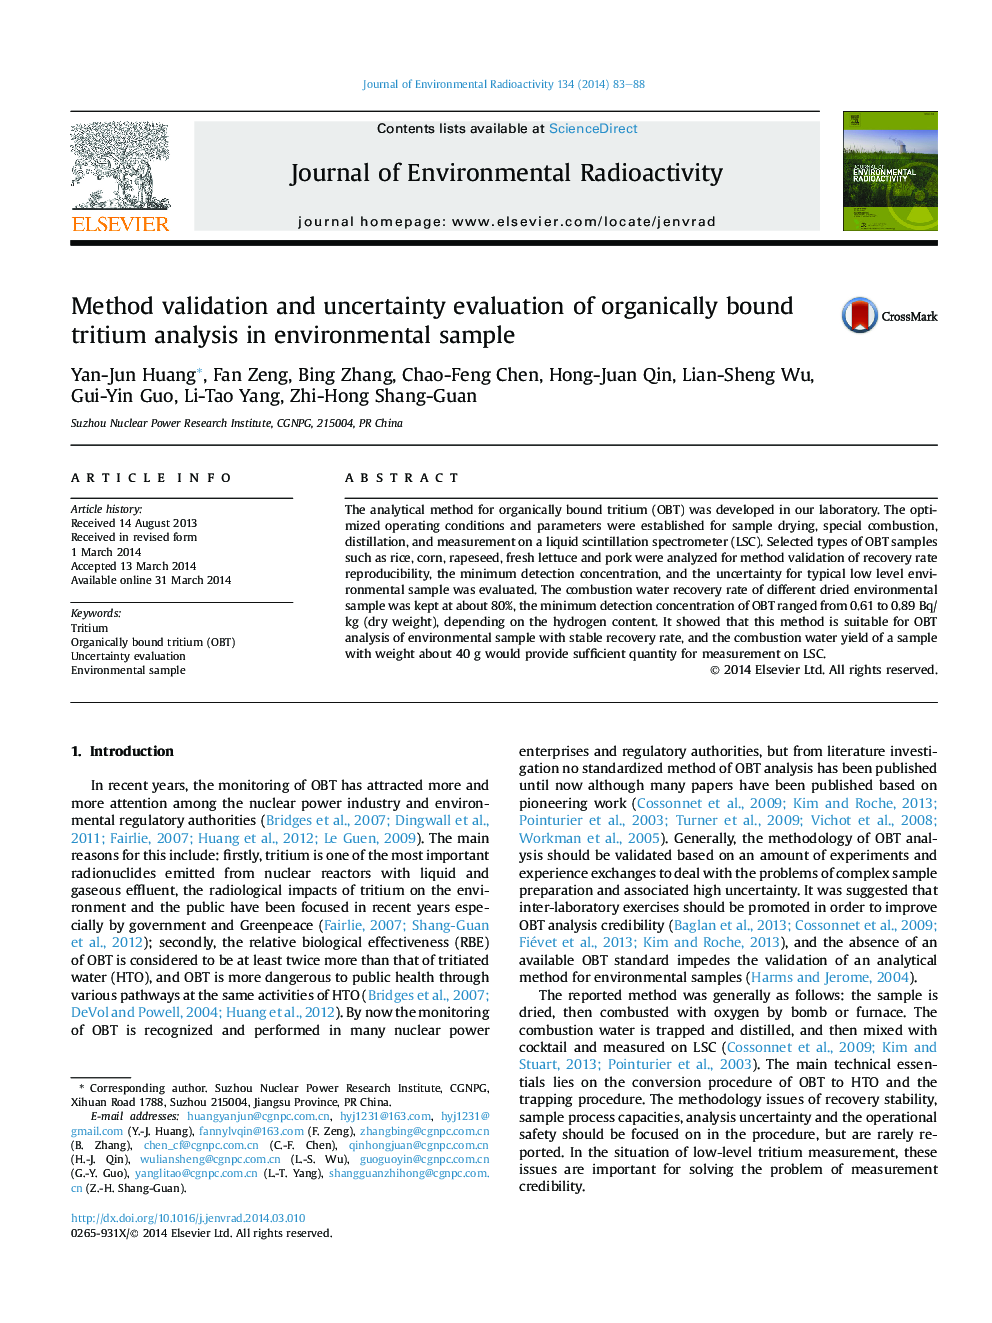 Method validation and uncertainty evaluation of organically bound tritium analysis in environmental sample